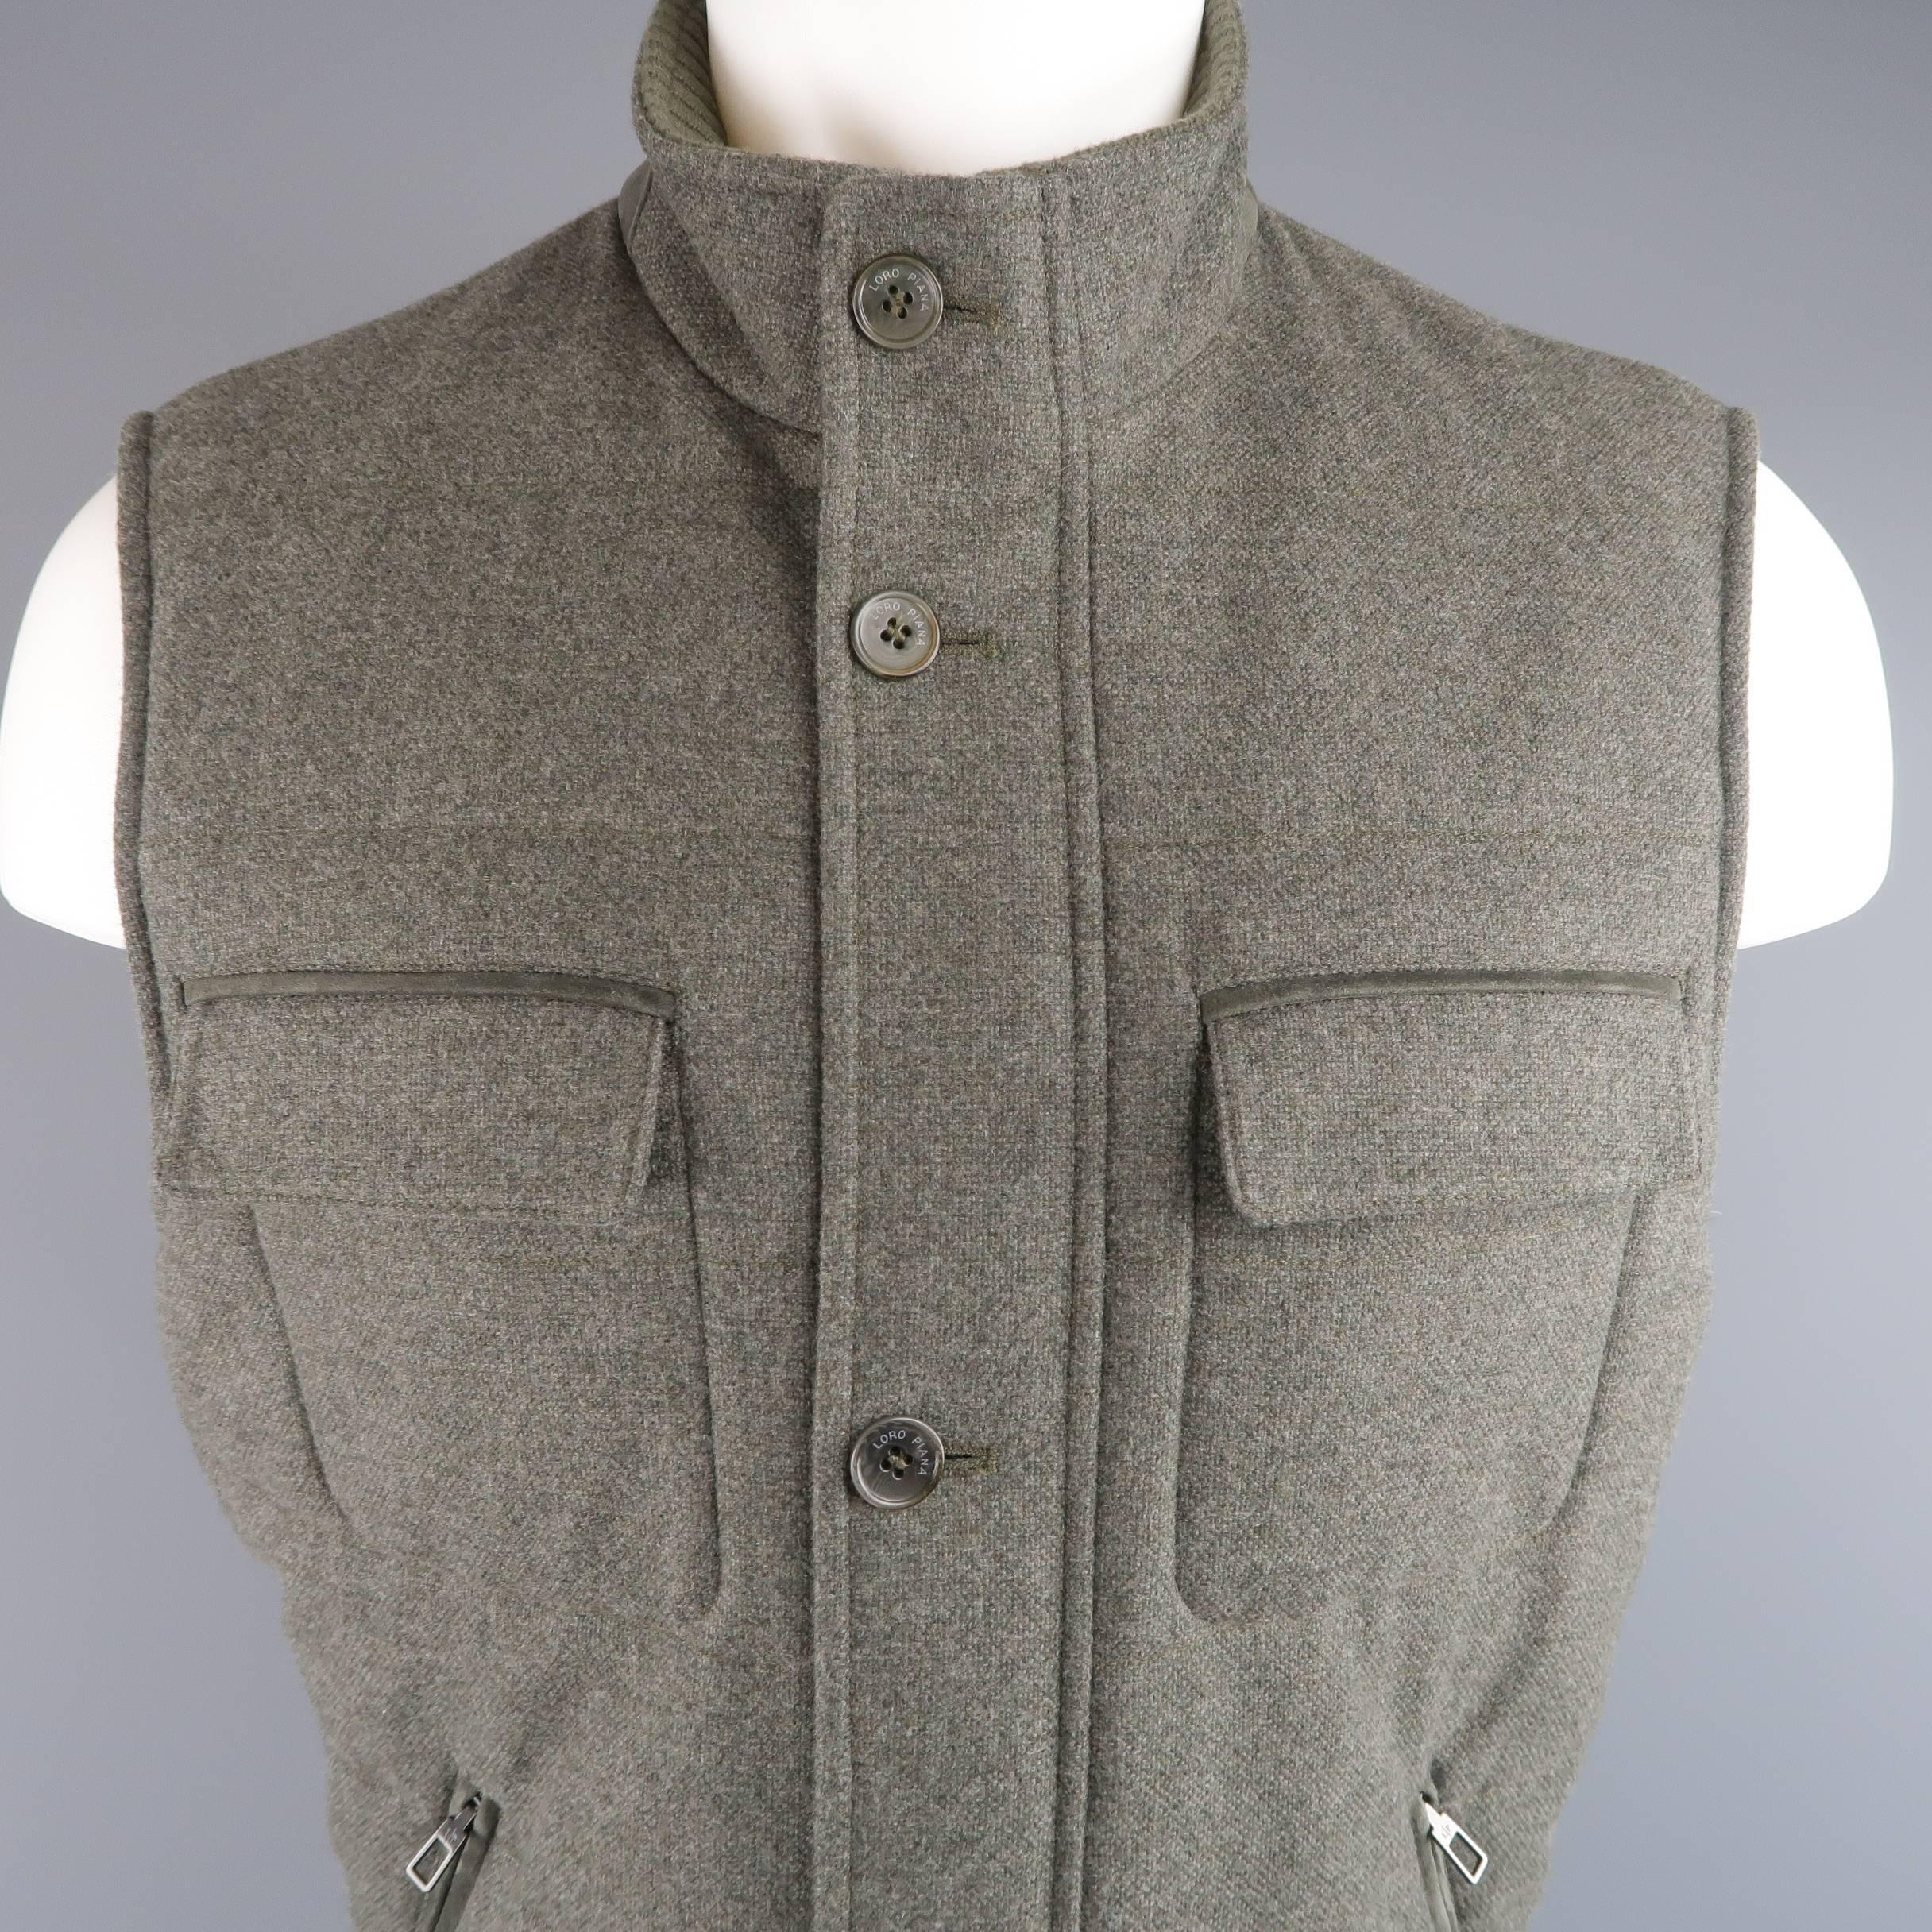 LORO PIANA quilted vest comes in a slate heather gray wool cashmere blend knit and features a high neck with ribbed liner, zip front with button over placket, slanted zip pockets with suede piping, and flap breast pockets. Made in Italy.
 
Excellent